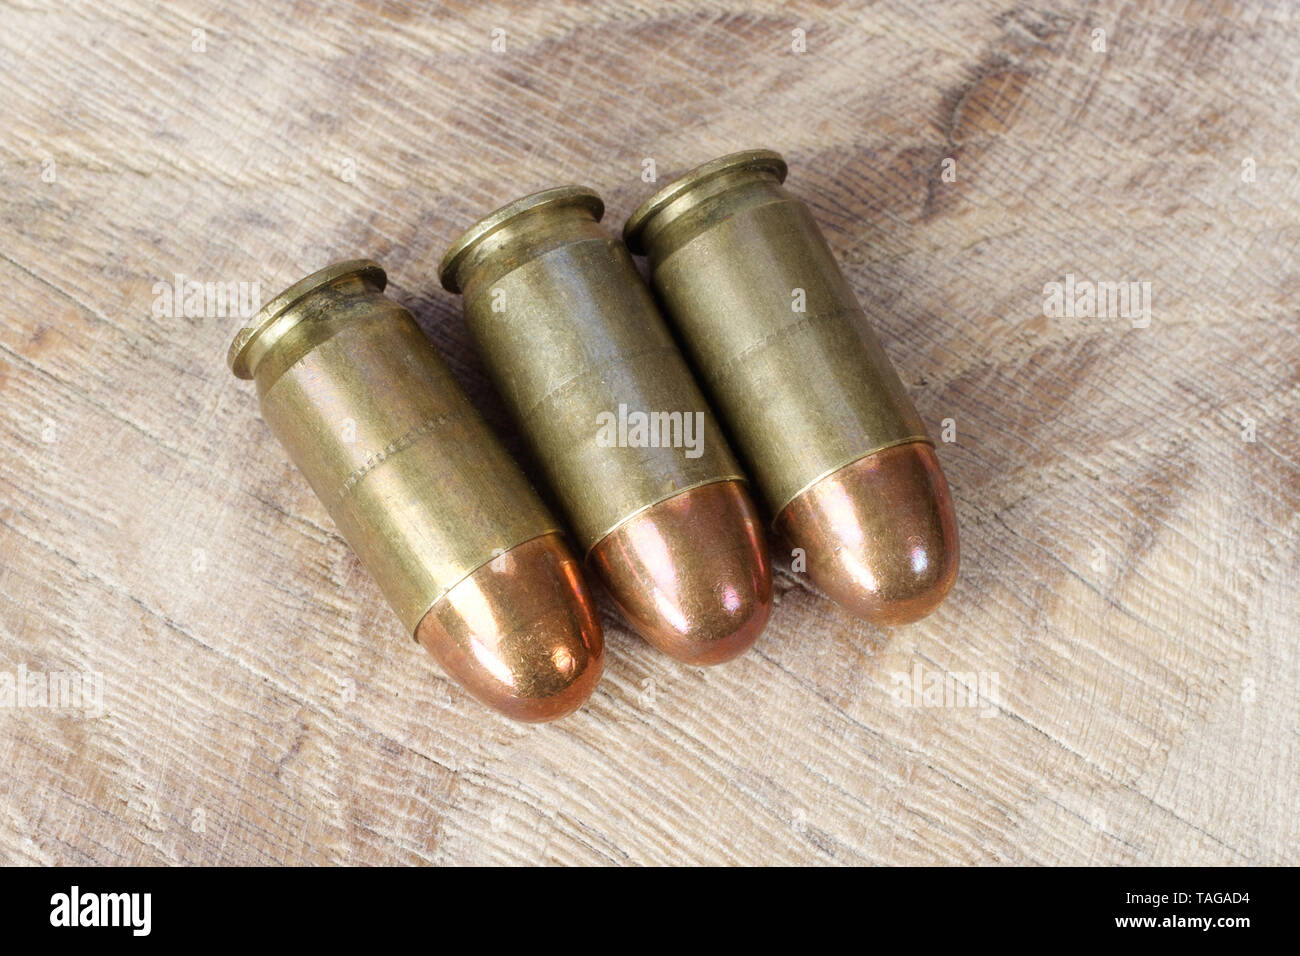 .45 ACP (Automatic Colt Pistol), or .45 Auto (11.43x23mm) a handgun cartridges designed by John Browning in 1905 on wooden background Stock Photo